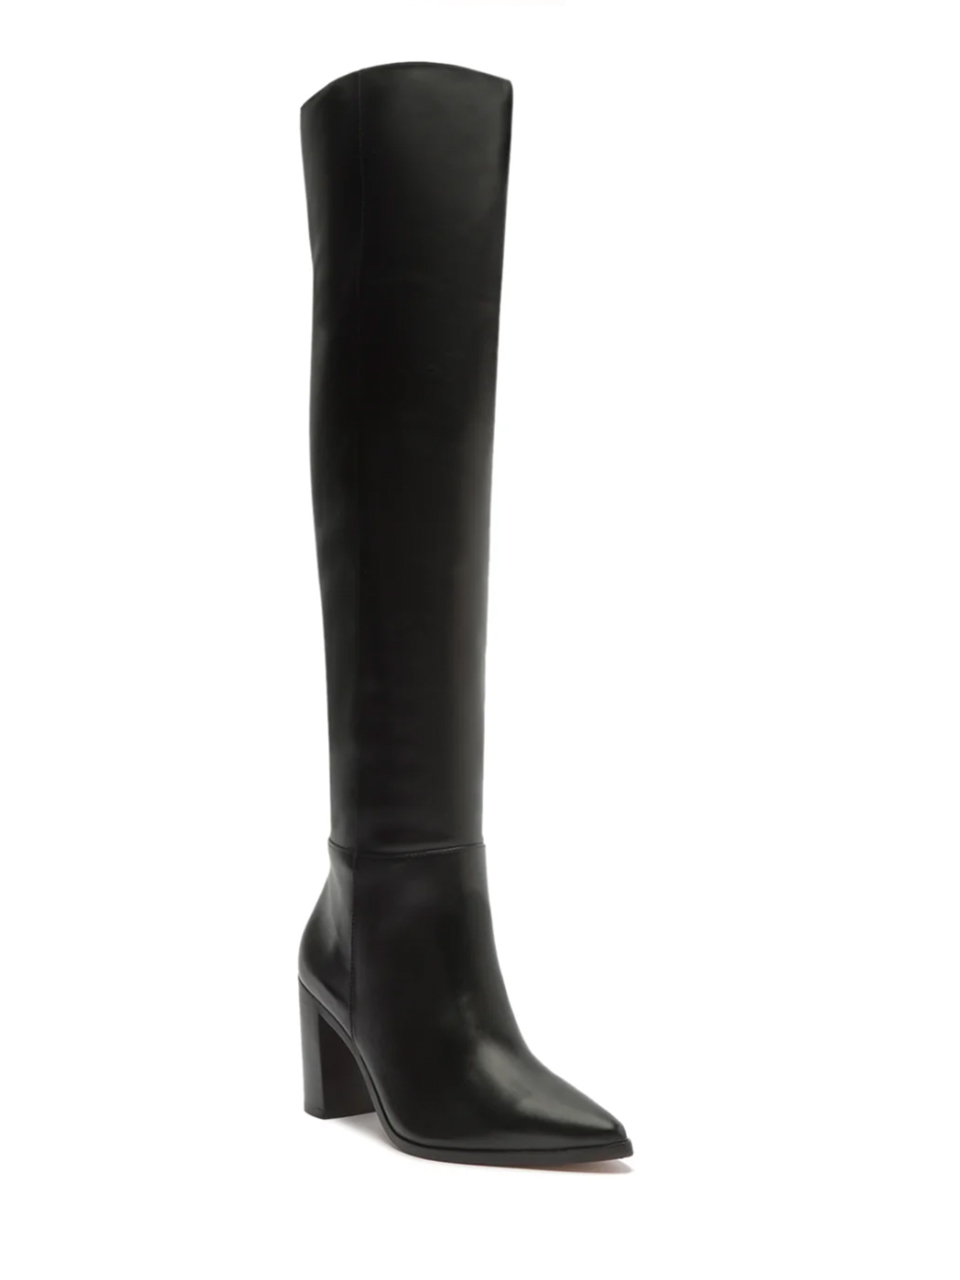 SCHUTZ Mikki Over the Knee Leather Boot in Black Front Side View 